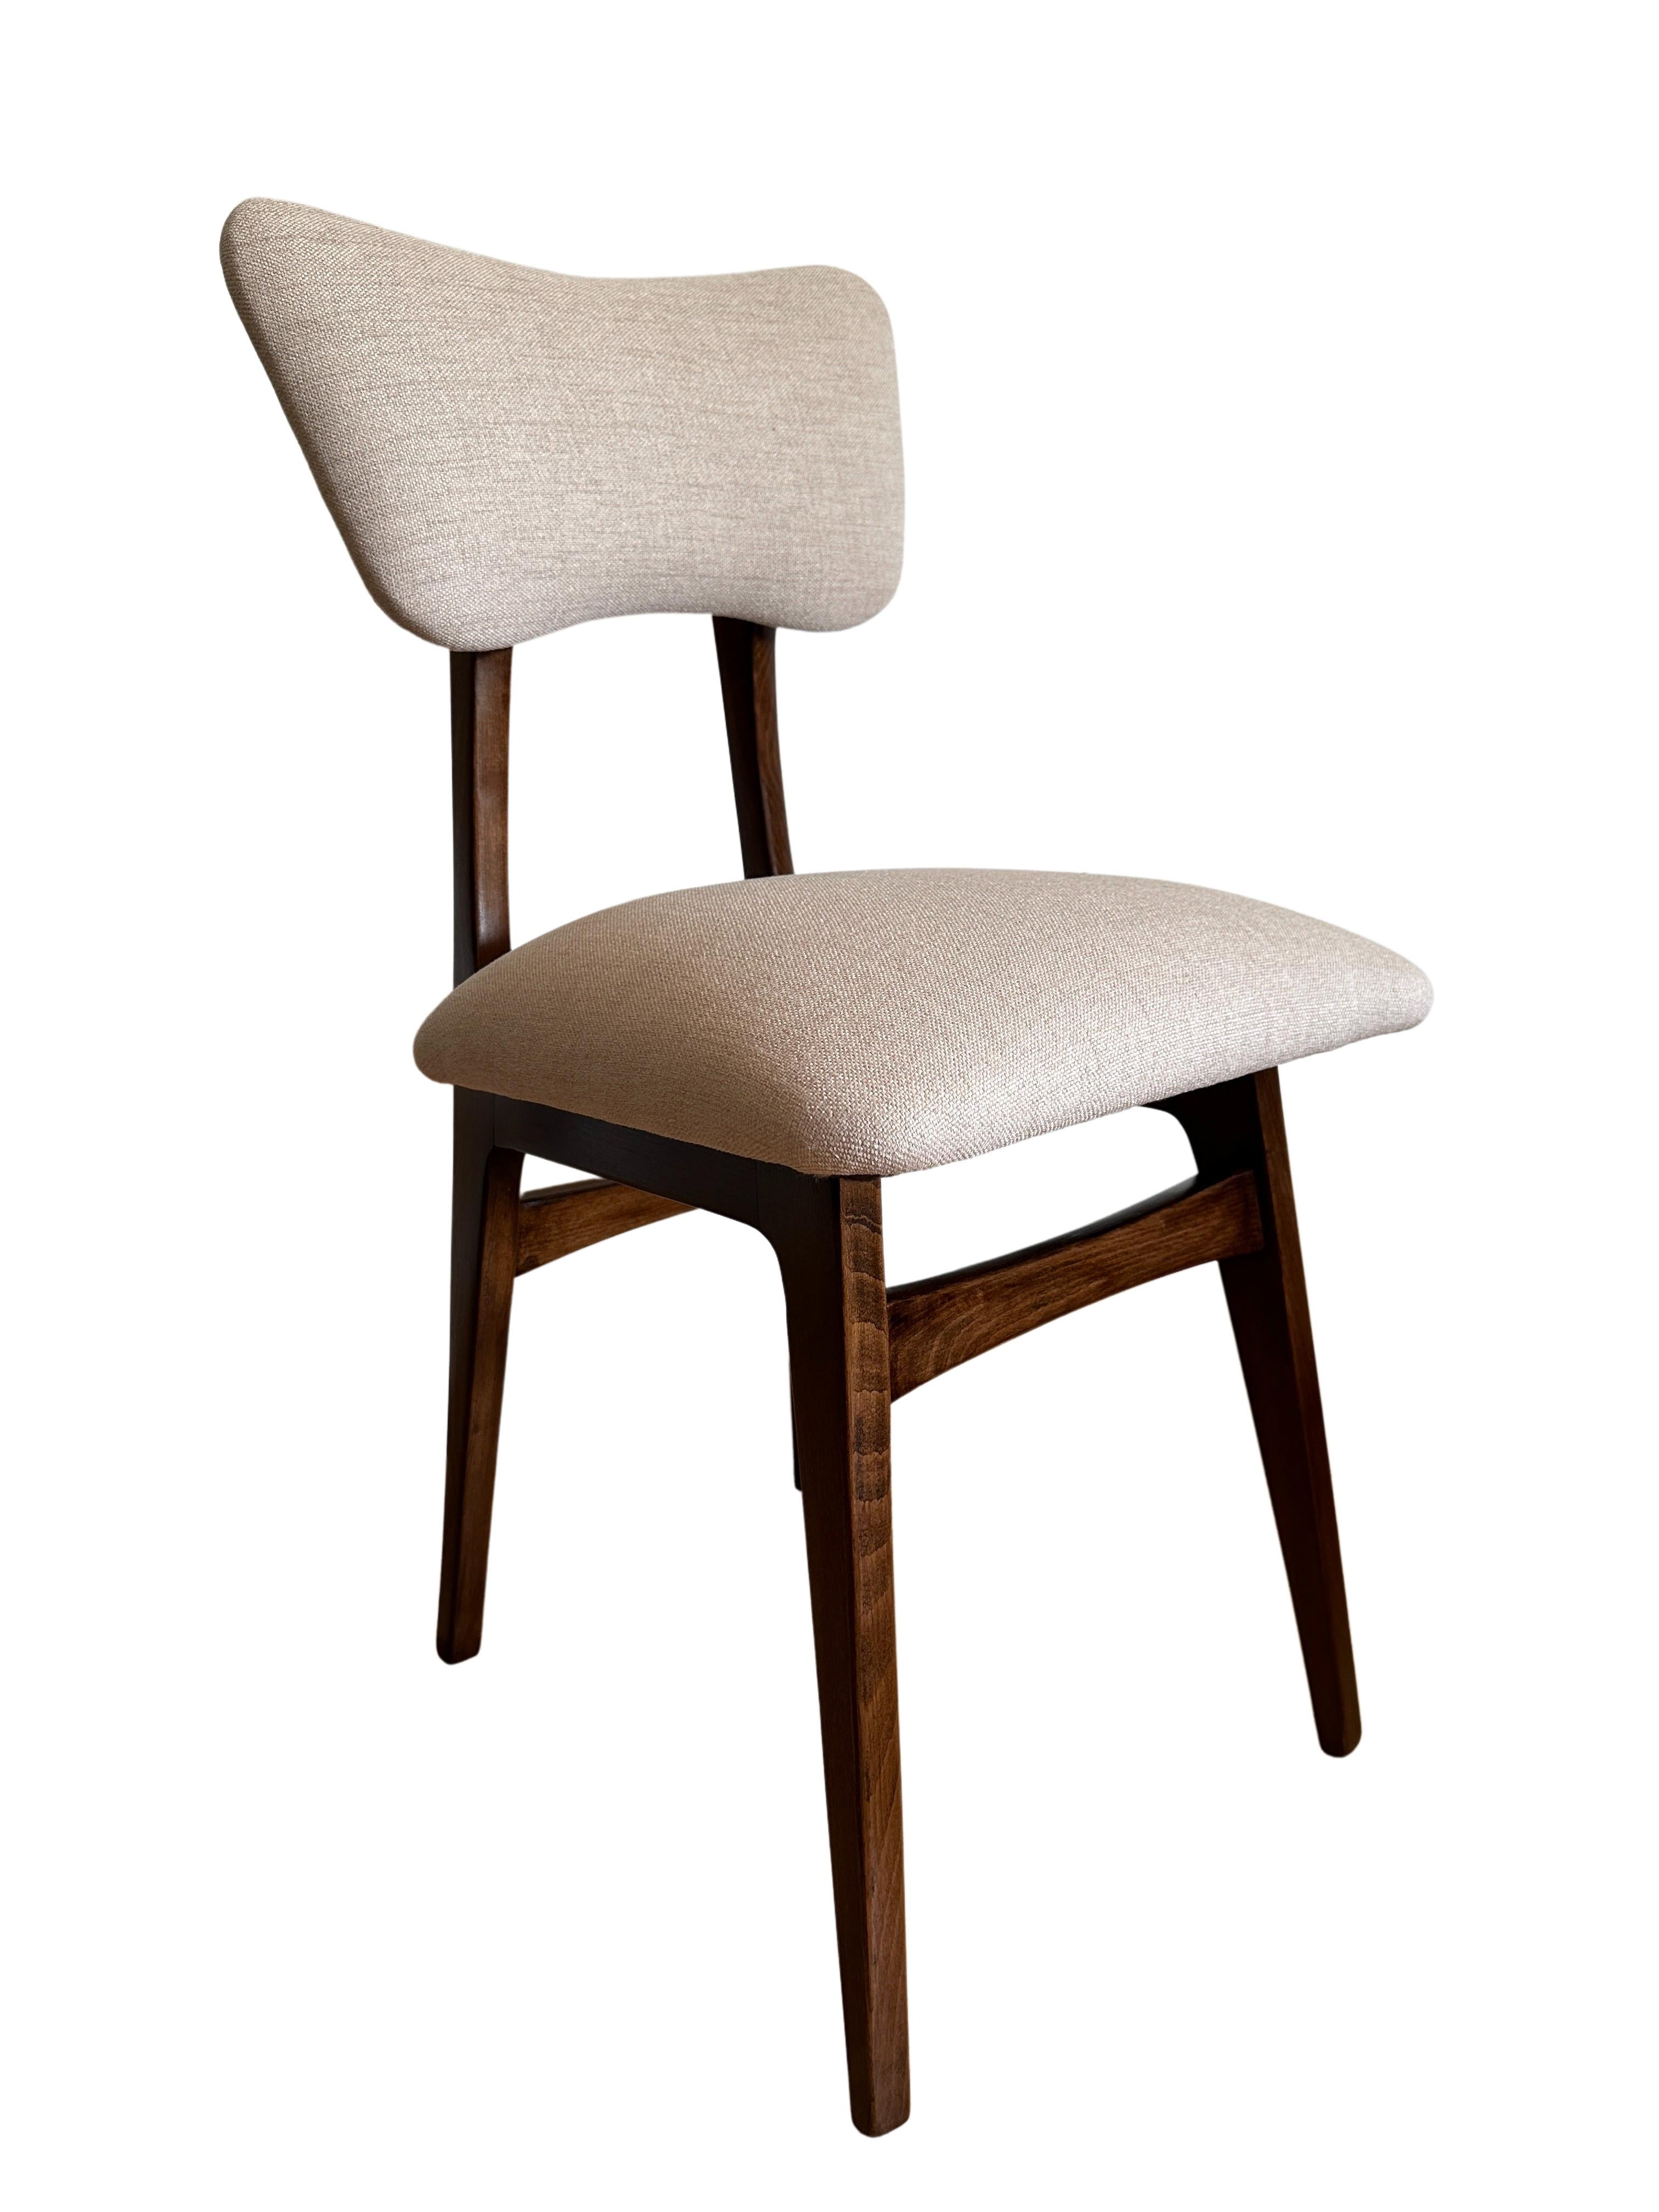 Set of 6 Midcentury Beige and Grey Dining Chairs, Europe, 1960s For Sale 3